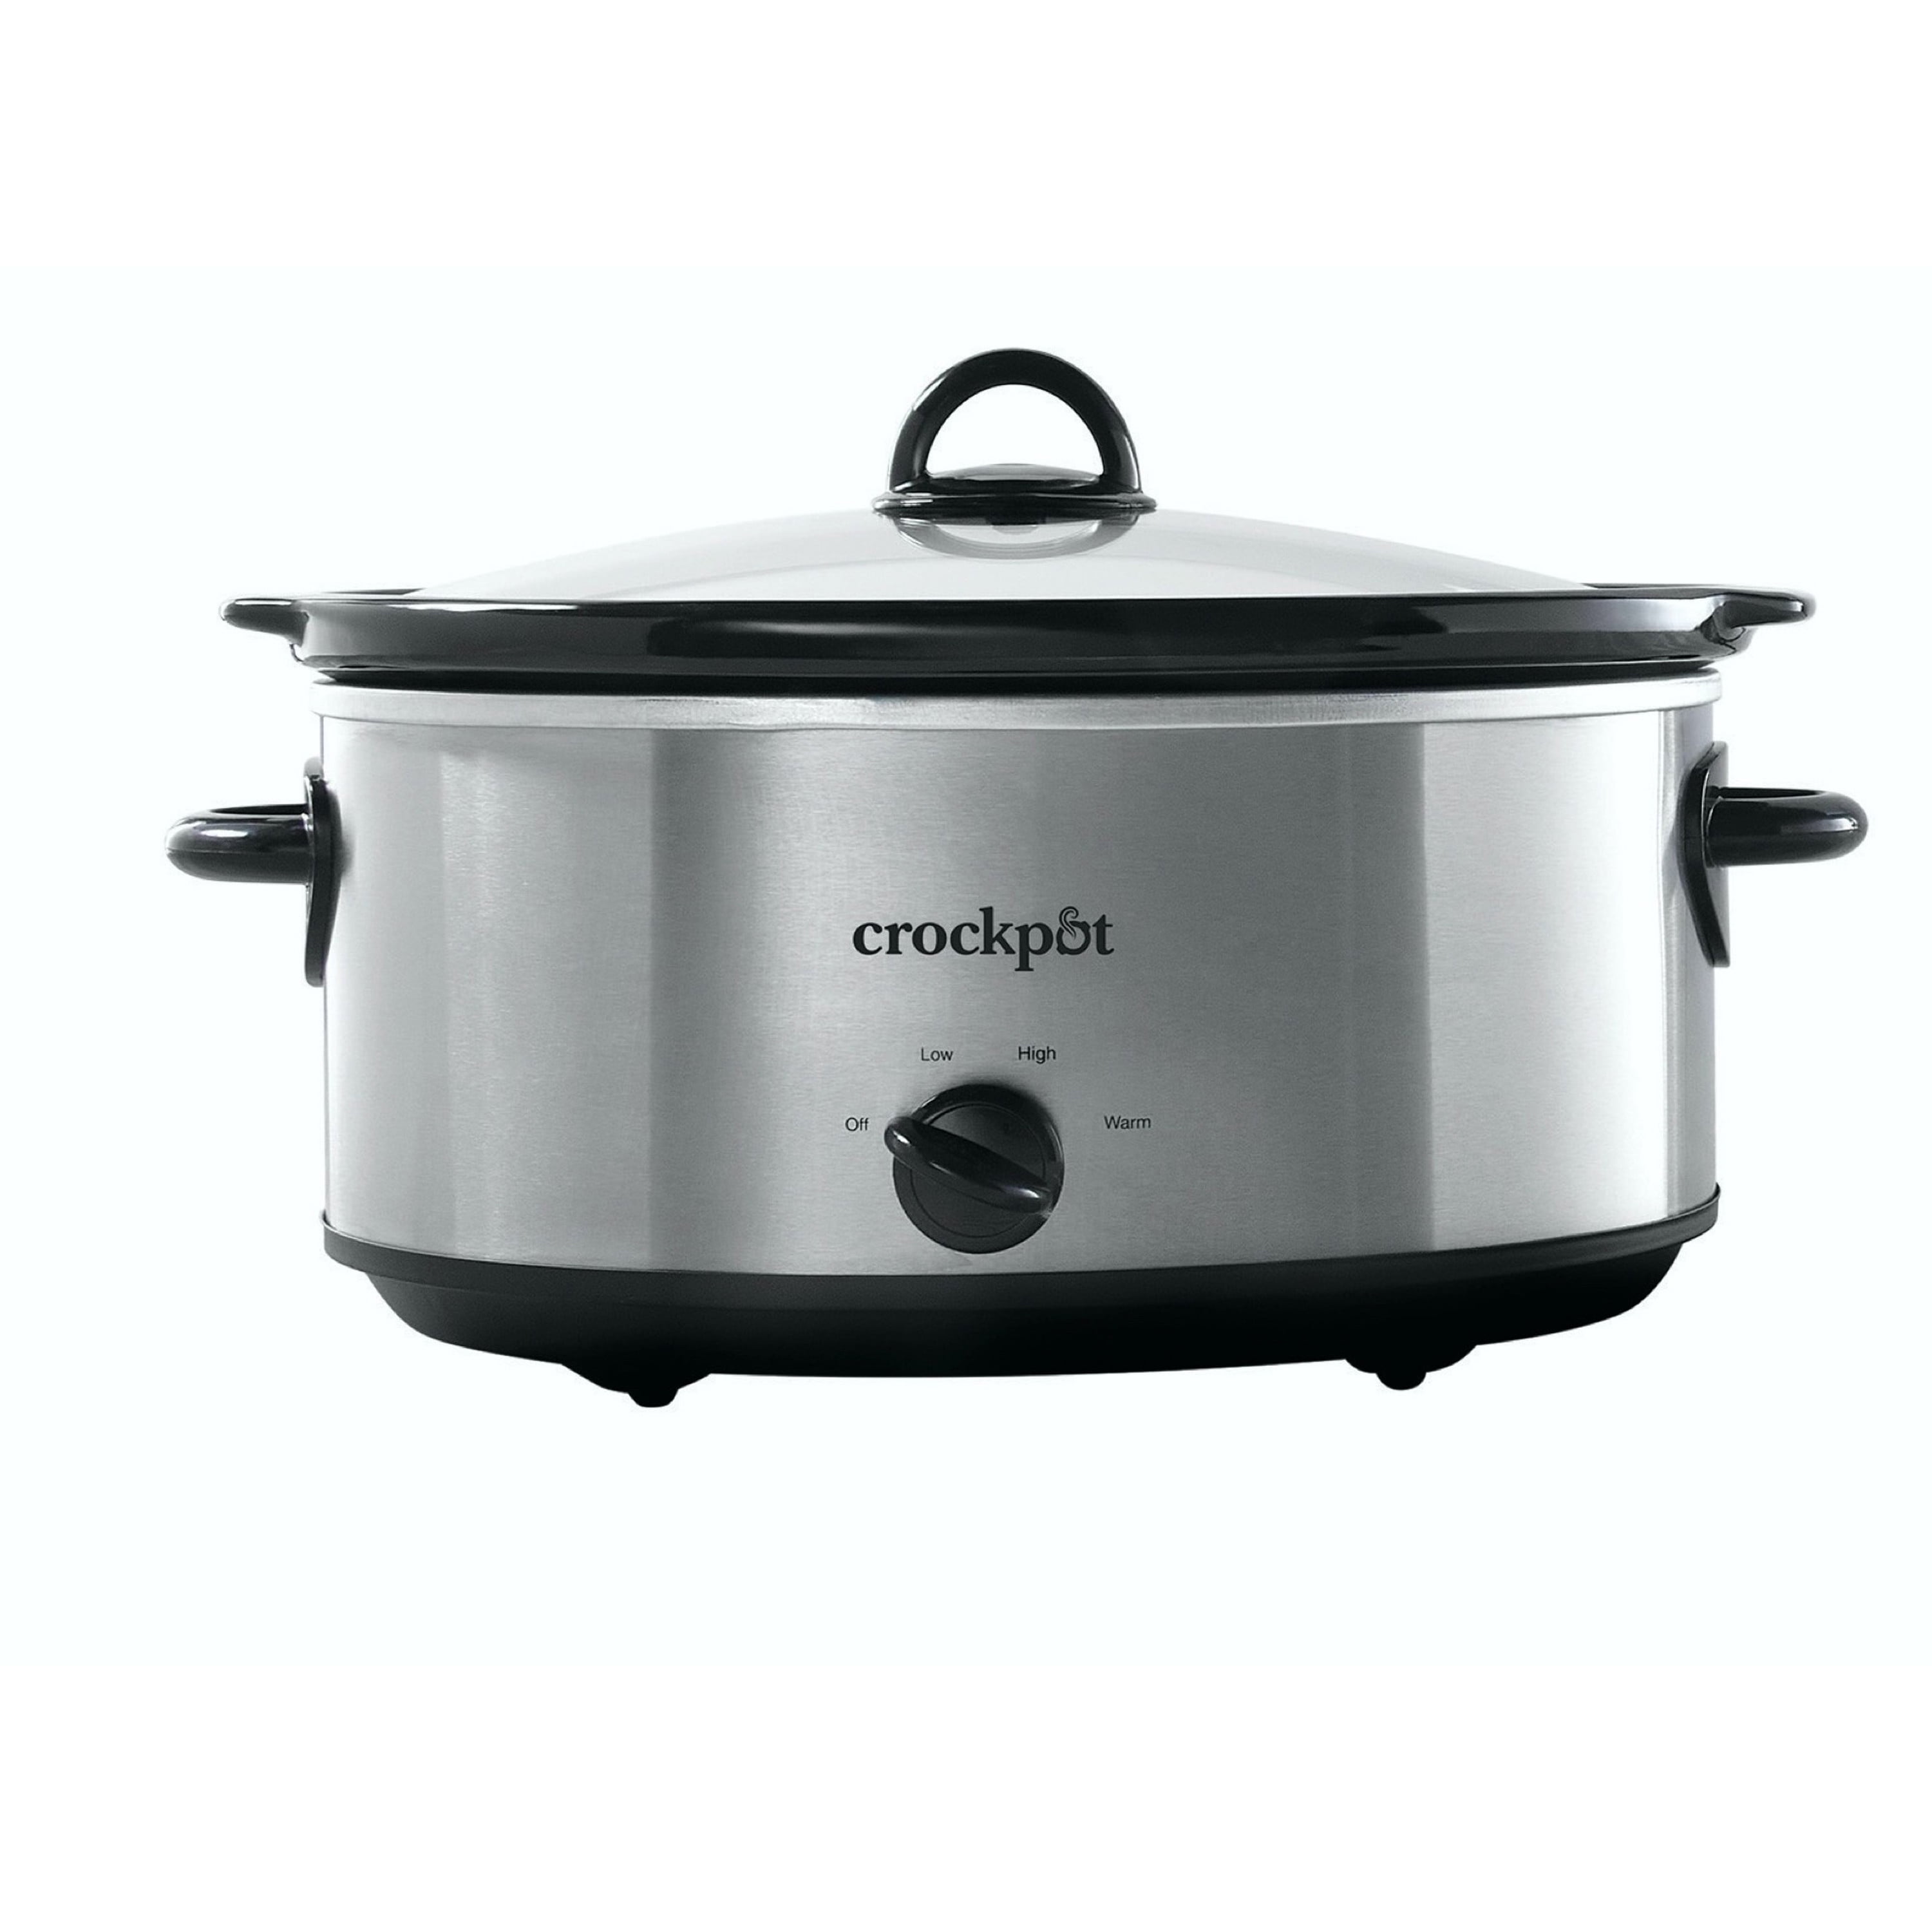 Crockpot™ 7-Quart Easy-to-Clean Cook & Carry™ Slow Cooker, Black Stainless  Steel Cooker Slow Cooker Stew Pot Electric Cooker